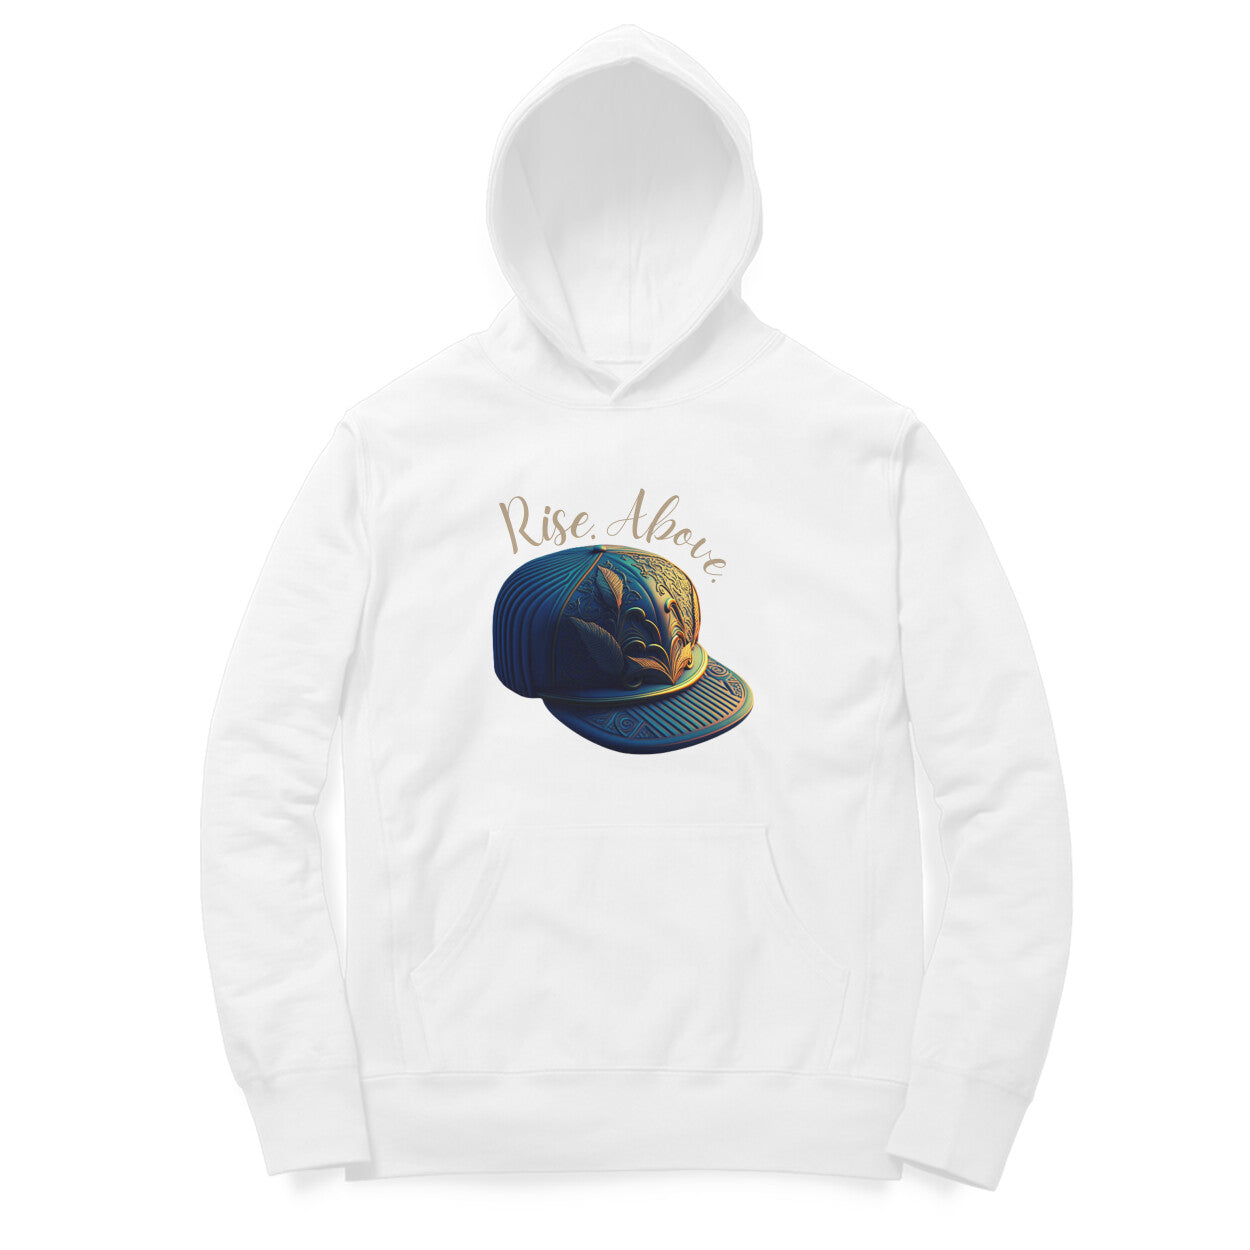 Rise above' hoodie